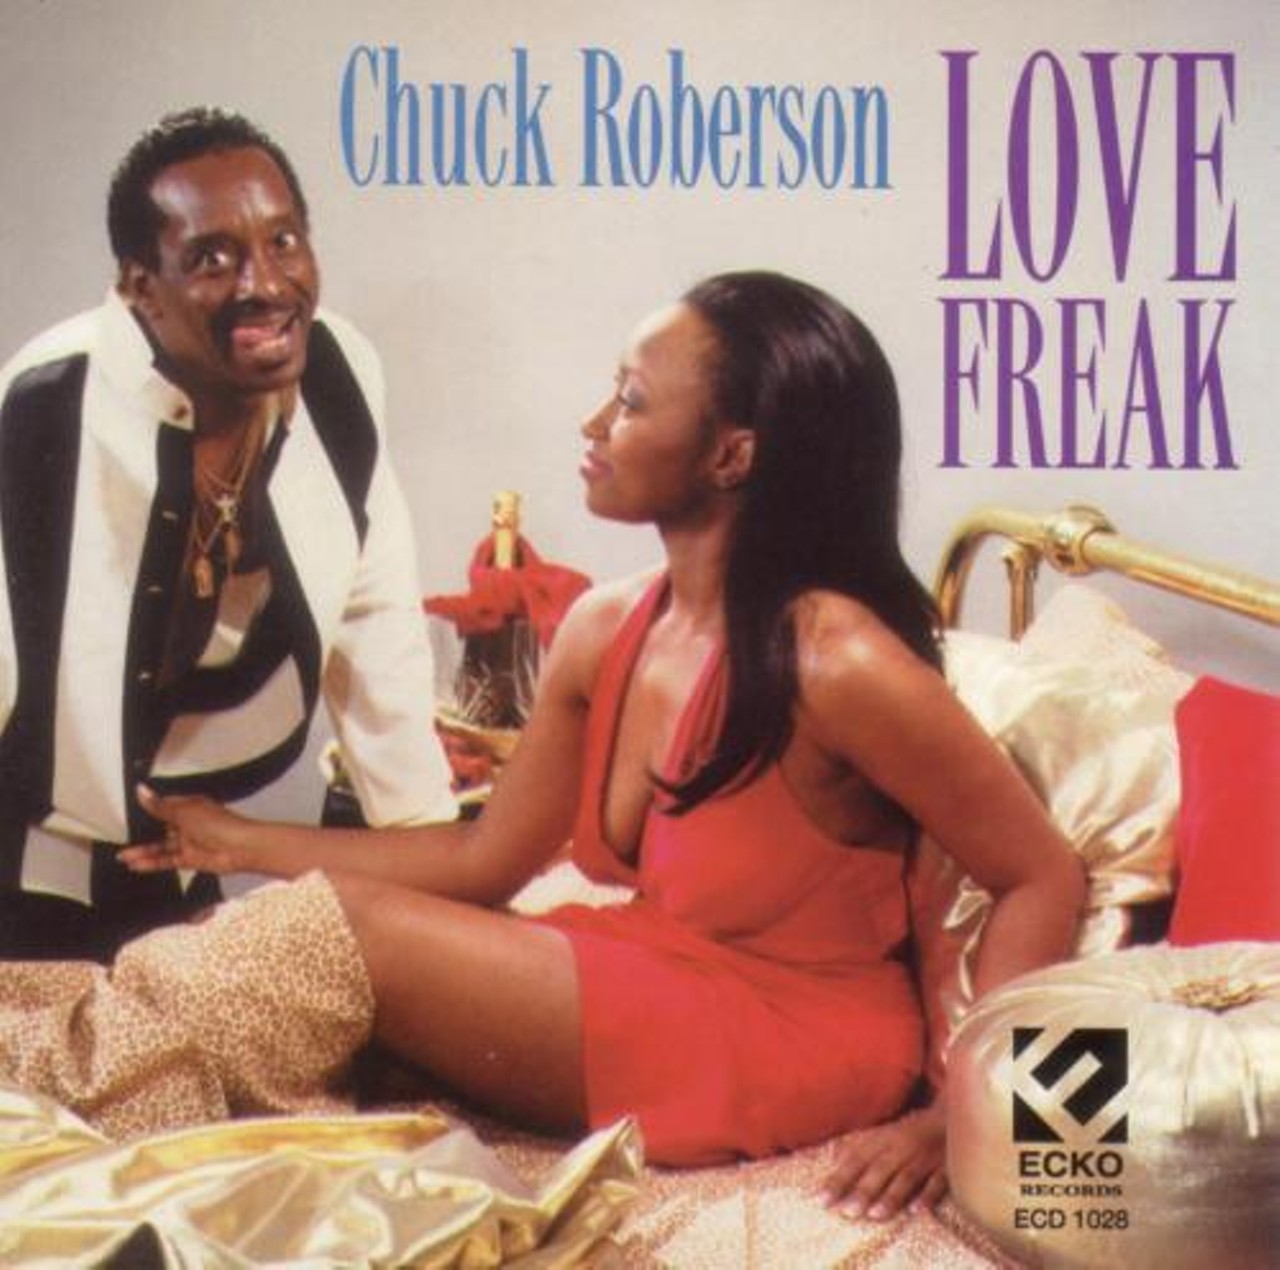 Chuck Roberson: Love Freak -- The look of deranged, delighted, and unbridled lust on Roberson&rsquo;s face makes this one worth posting here.